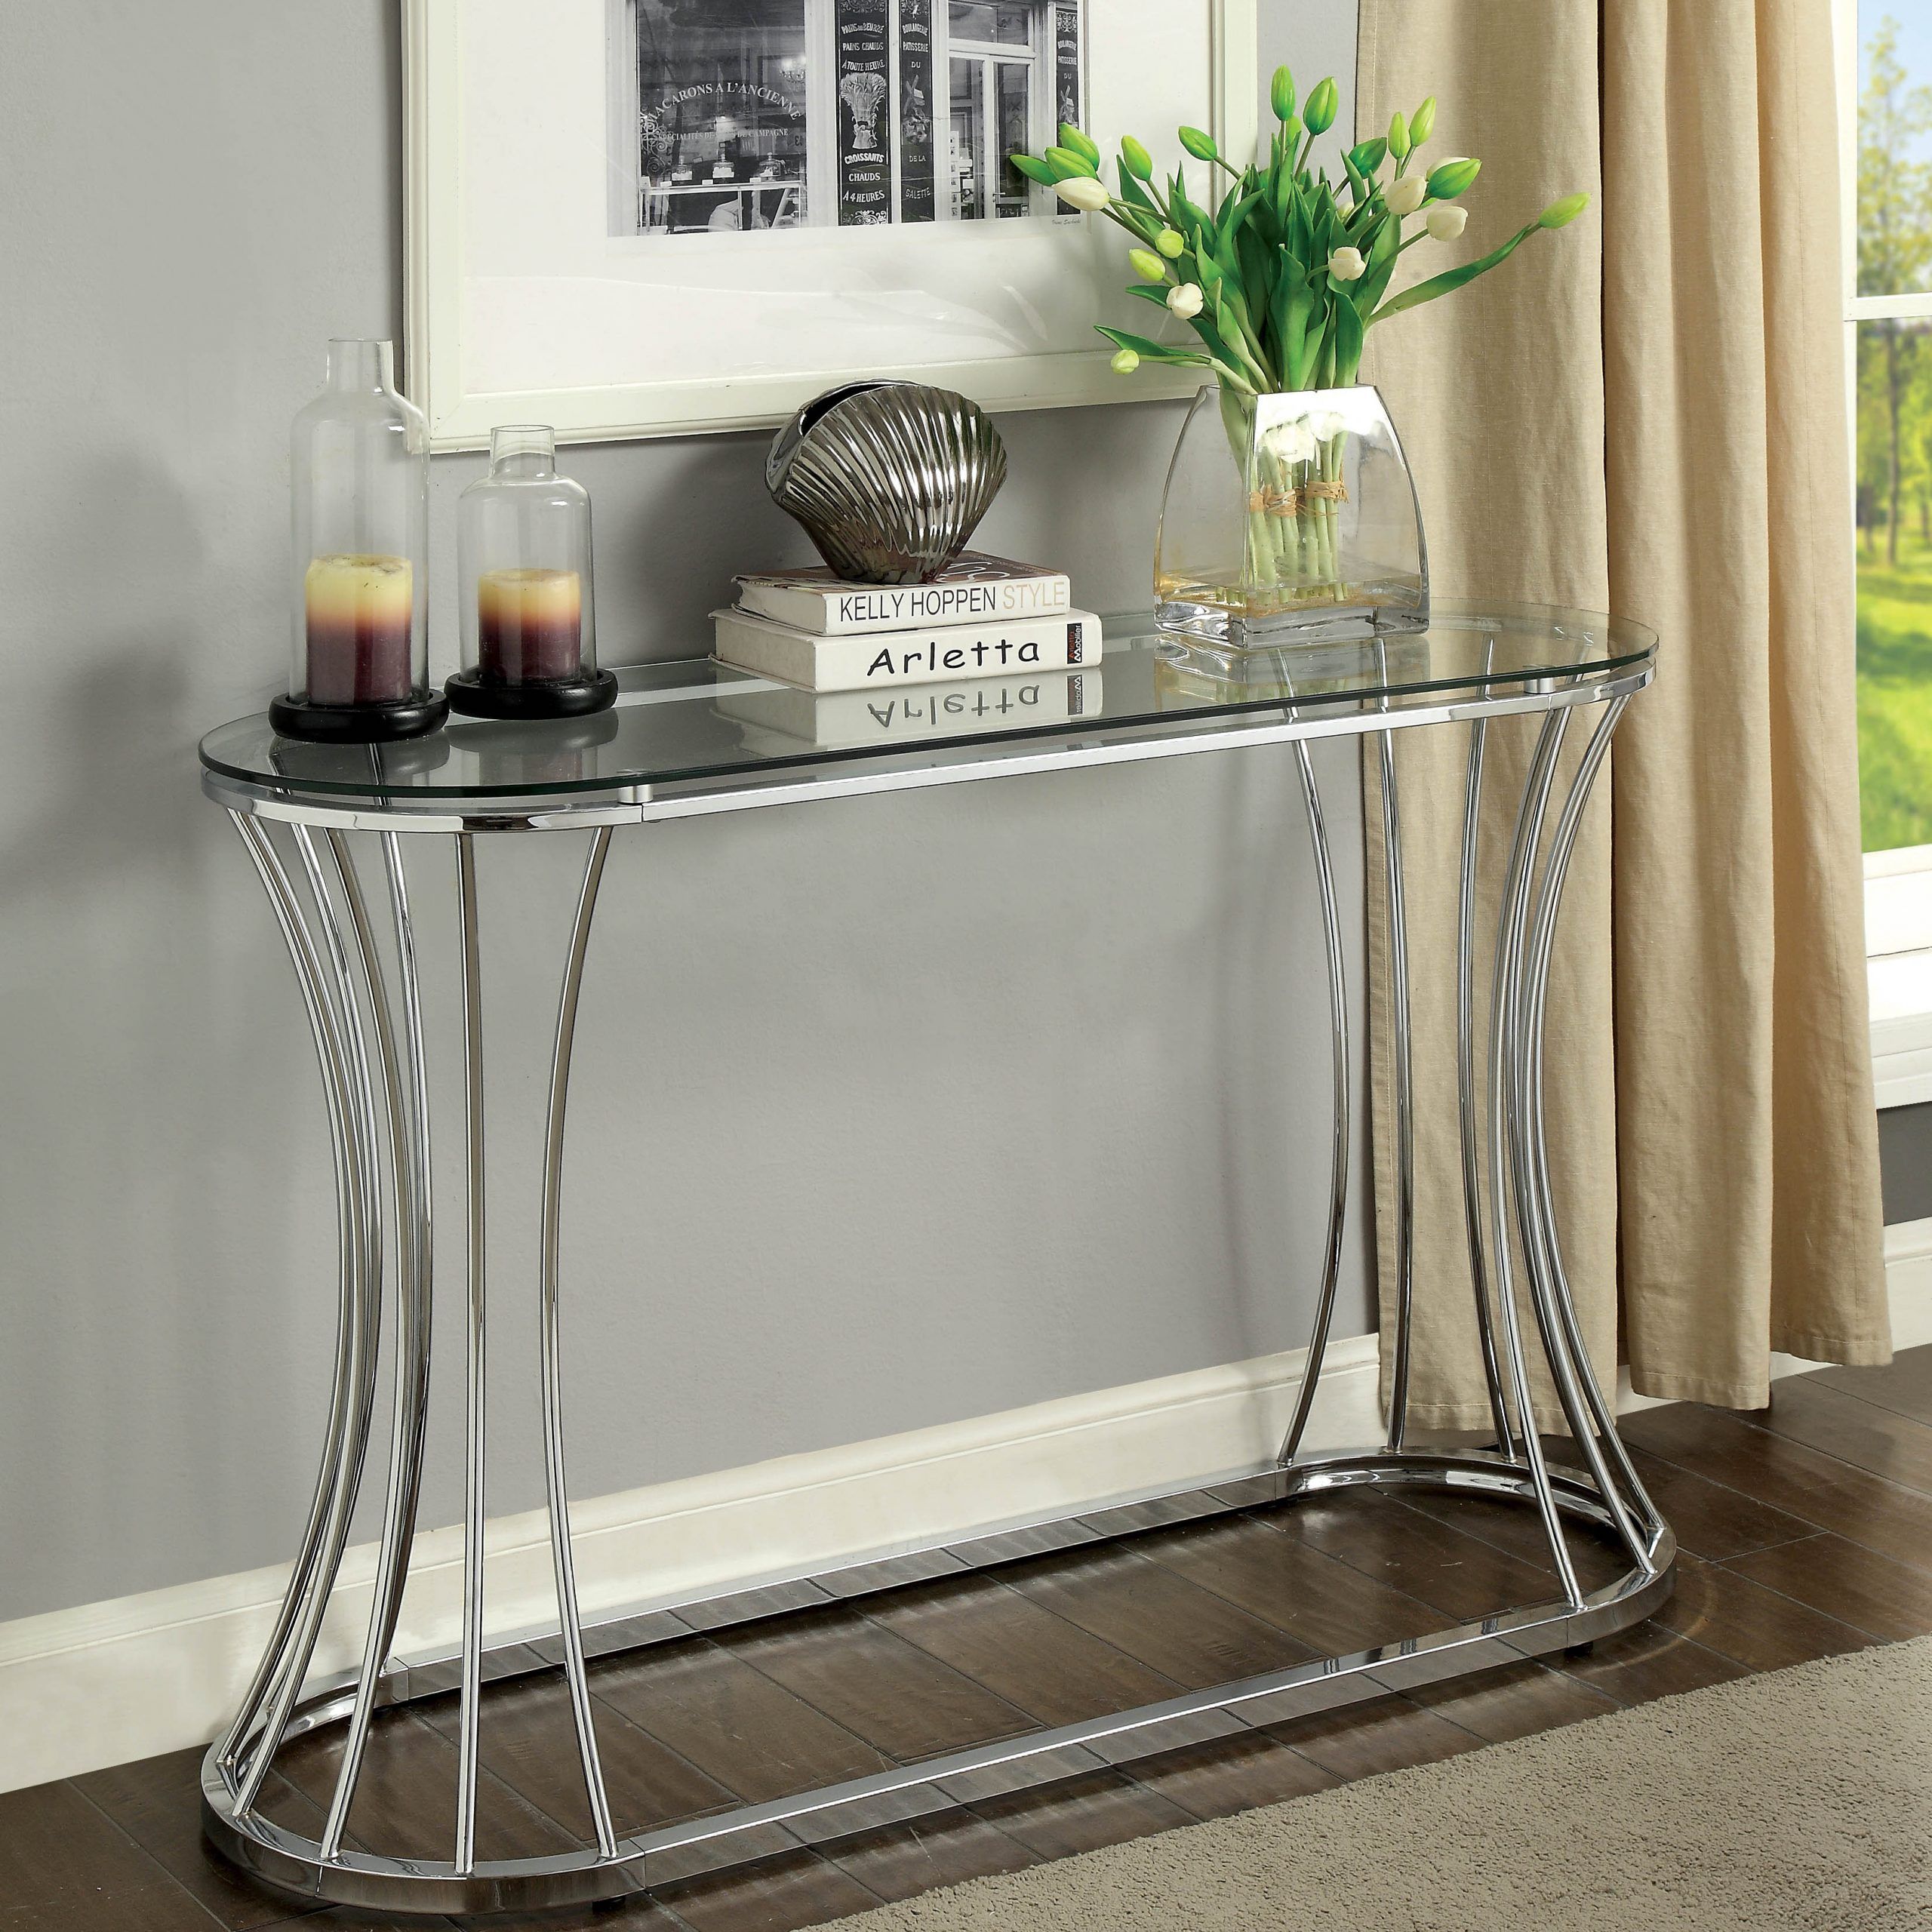 Furniture Of America Rocca Contemporary Glass Top Console Table, Chrome Inside Mirrored And Chrome Modern Console Tables (View 3 of 20)